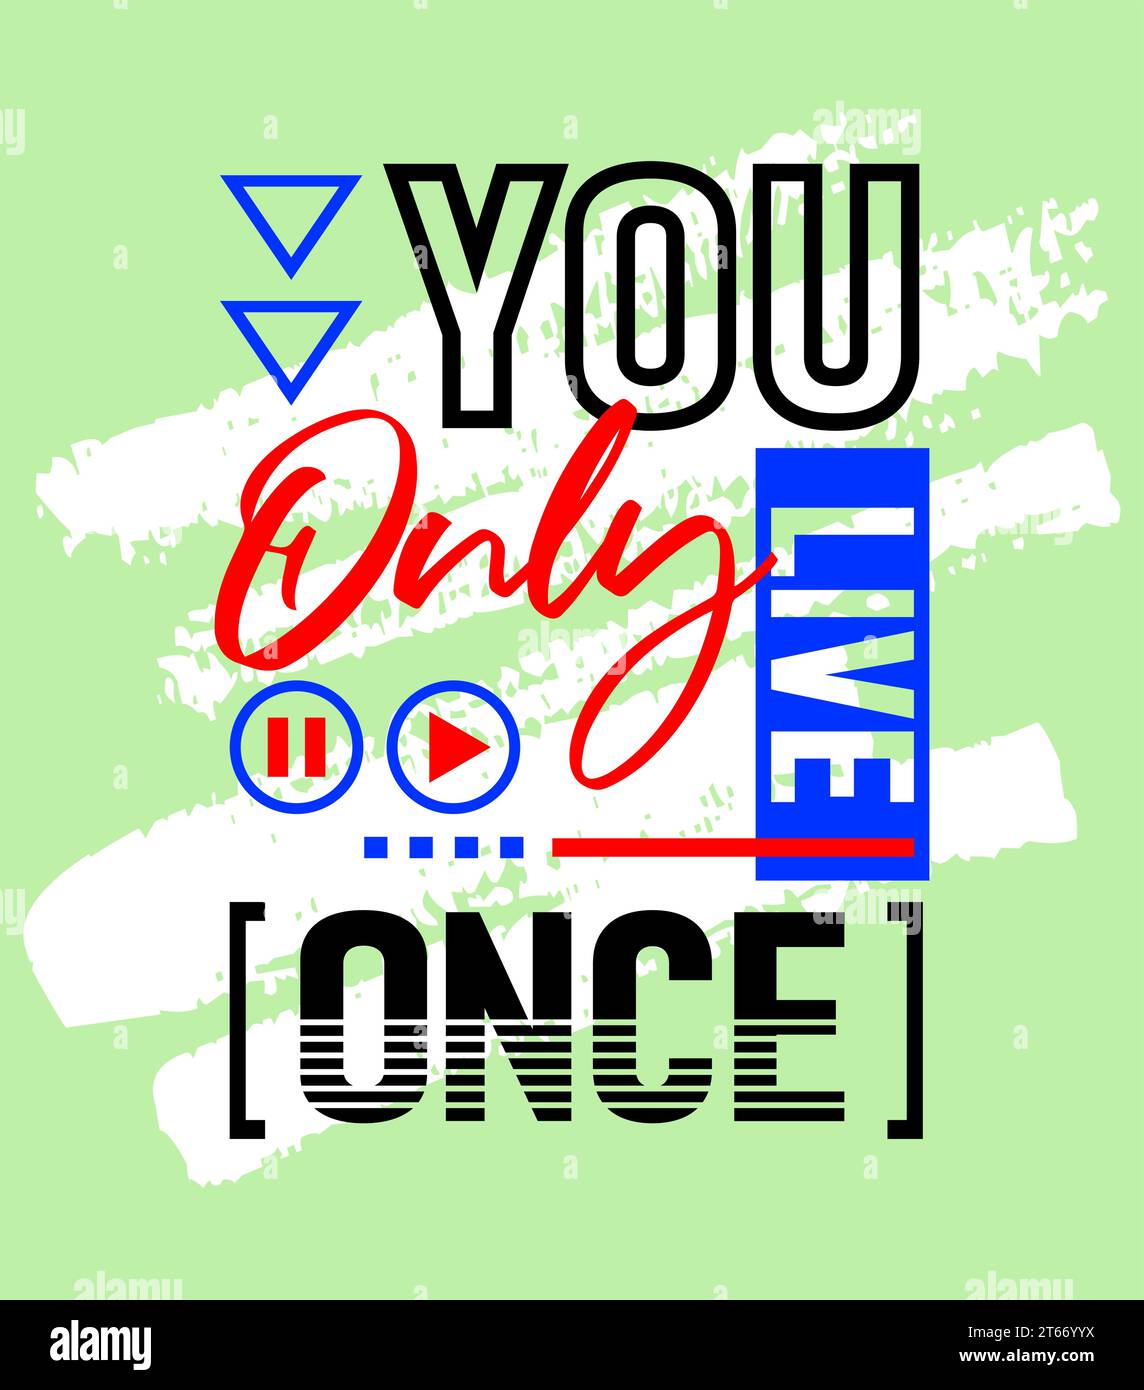 You only live once motivational inspirational quote, Short phrases ...